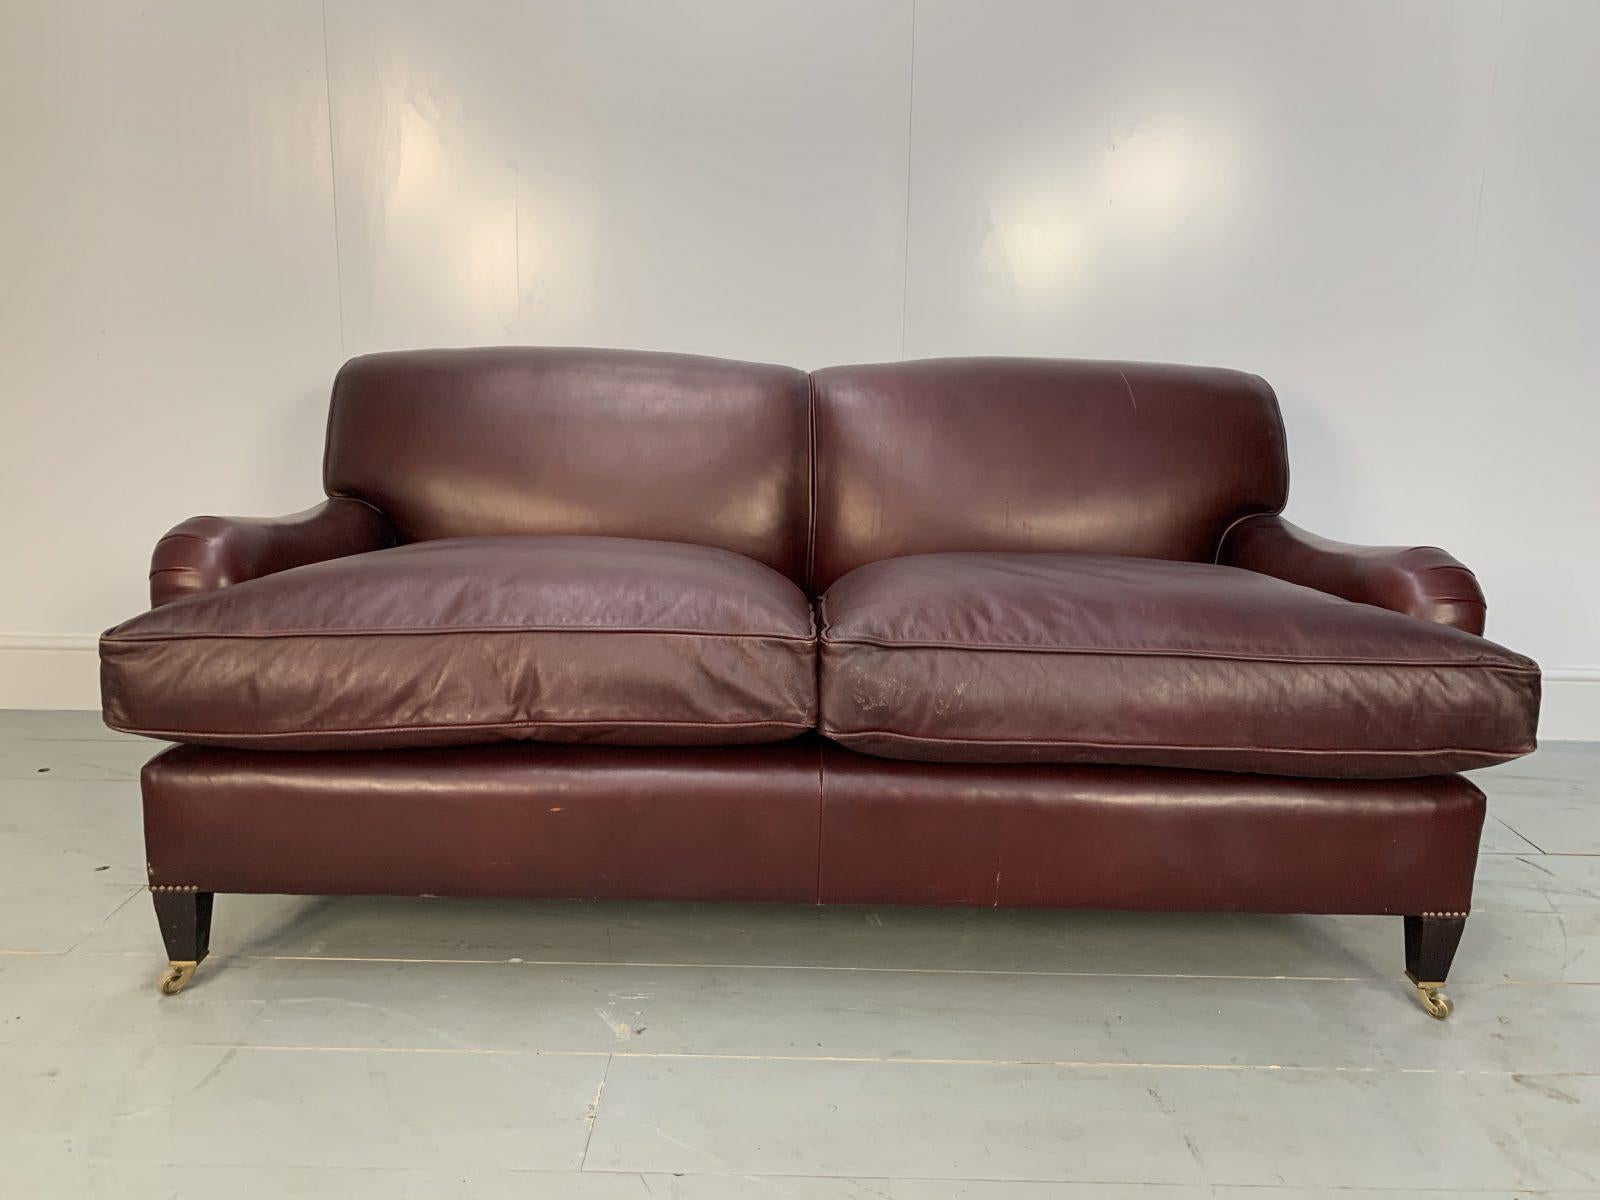 On offer on this occasion is, quite possibly, the only sofa you might ever need to buy.      This is an ultra-rare opportunity to acquire what is, unequivocally, the best of the best, it being a most spectacular, used George Smith Signature